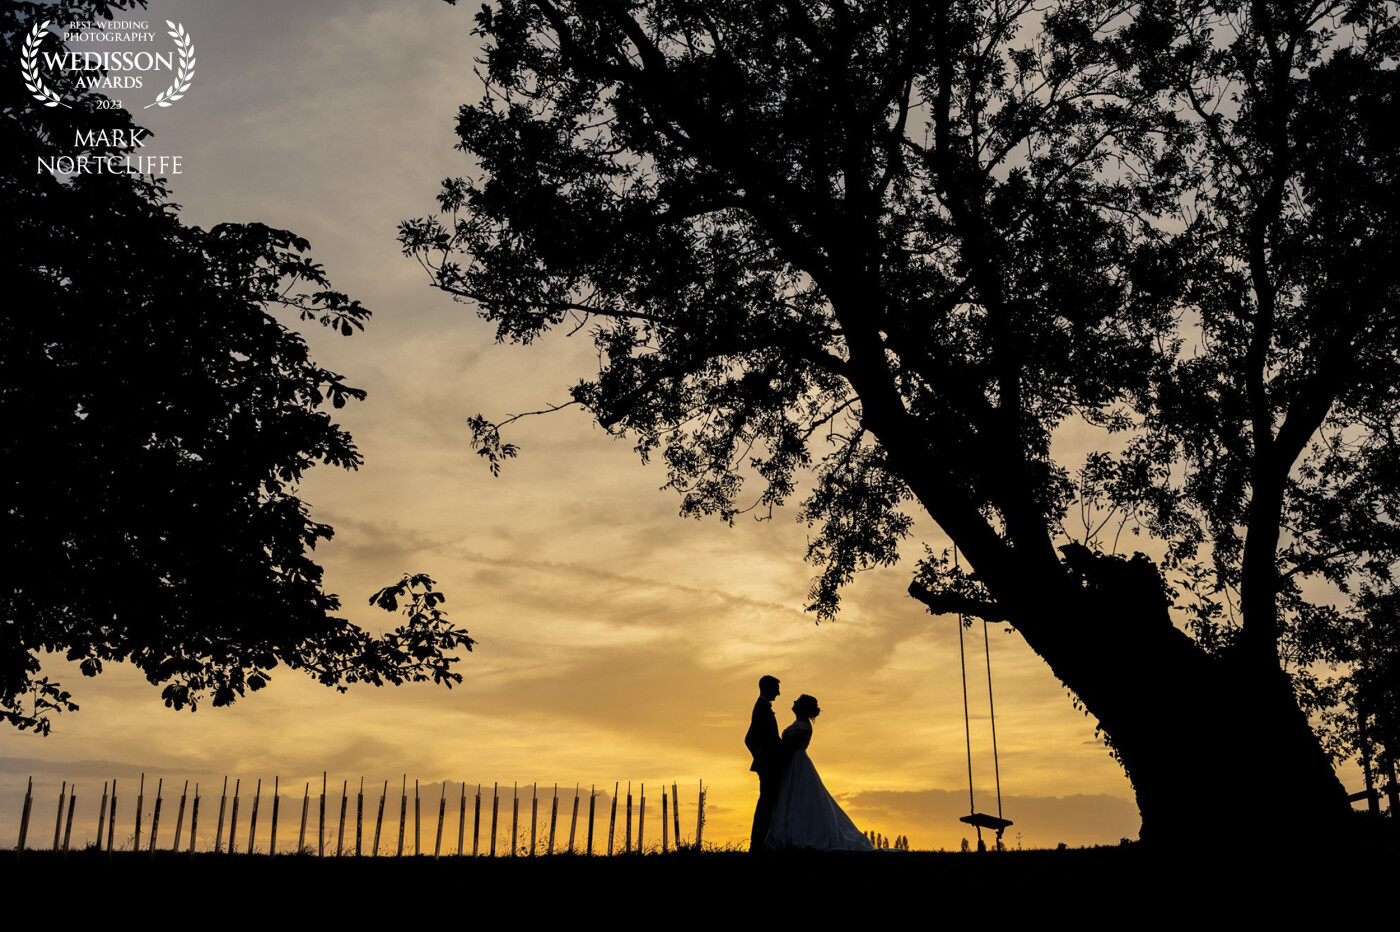 This shot was taken at The Granary Estates in Newmarket here in the UK. Sasha & Adam trusted me enough to pull them away from their wedding guests and their wedding breakfast to get this shot. The sky was just perfect. I'd visualised this shot earlier in the day and prayed for the right balance of conditions to achieve it. I think we won on the day. Thank you to my couple and to Wedisson for the award. Win Win situation.